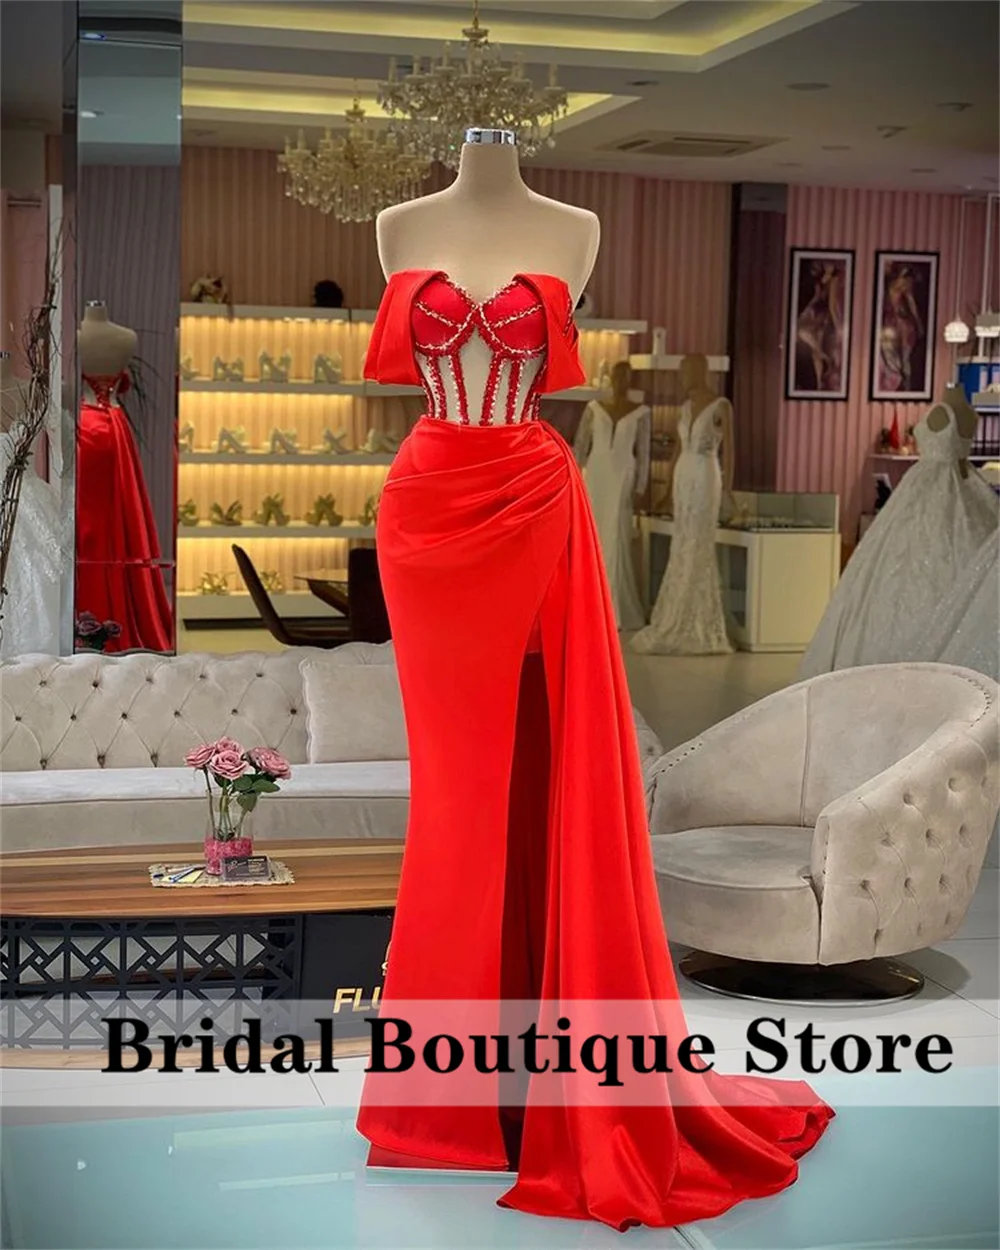 

Sweetheart Mermaid Red Cocktail Dresses Off Shoulder High Slit Beaded Formal Prom Gowns Party Homecoming Dress Robes De Bal